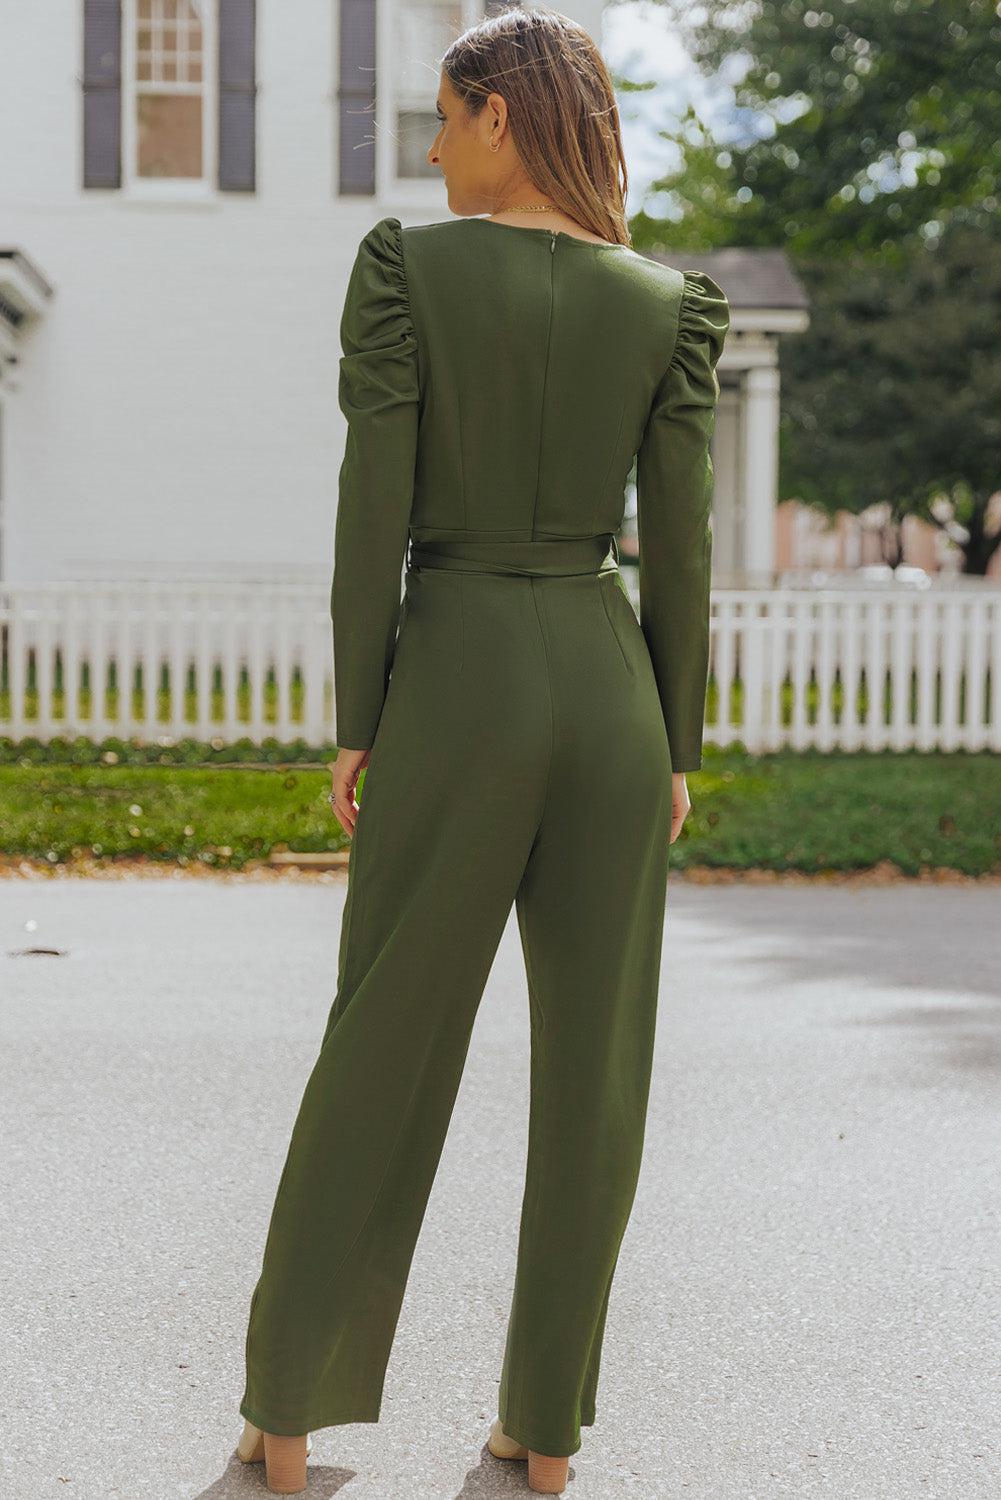 Belted Long Puff Sleeve V-Neck Jumpsuit BLUE ZONE PLANET